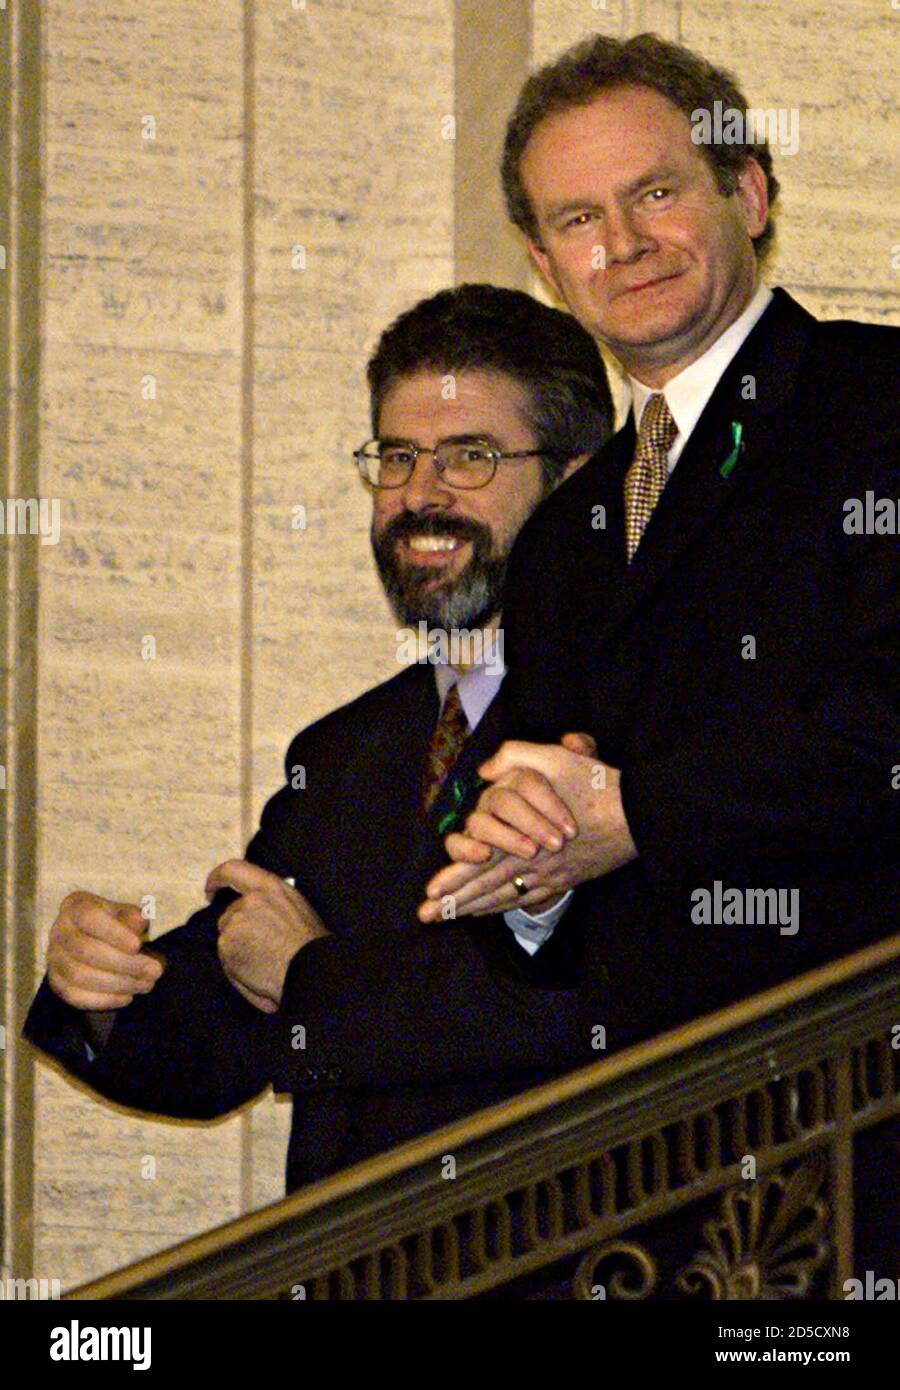 Sinn Fein Minister for Education Martin McGuinness (R) and leader Gerry Adams smile as they descend the stairs at Stormont Building, November 29. Protestant and Roman Catholic parties nominated ministers to a coalition government of pro-Irish Republicans and pro-British Unionists which will become fully operational on Thursday, when London will hand over power.  FP Stock Photo